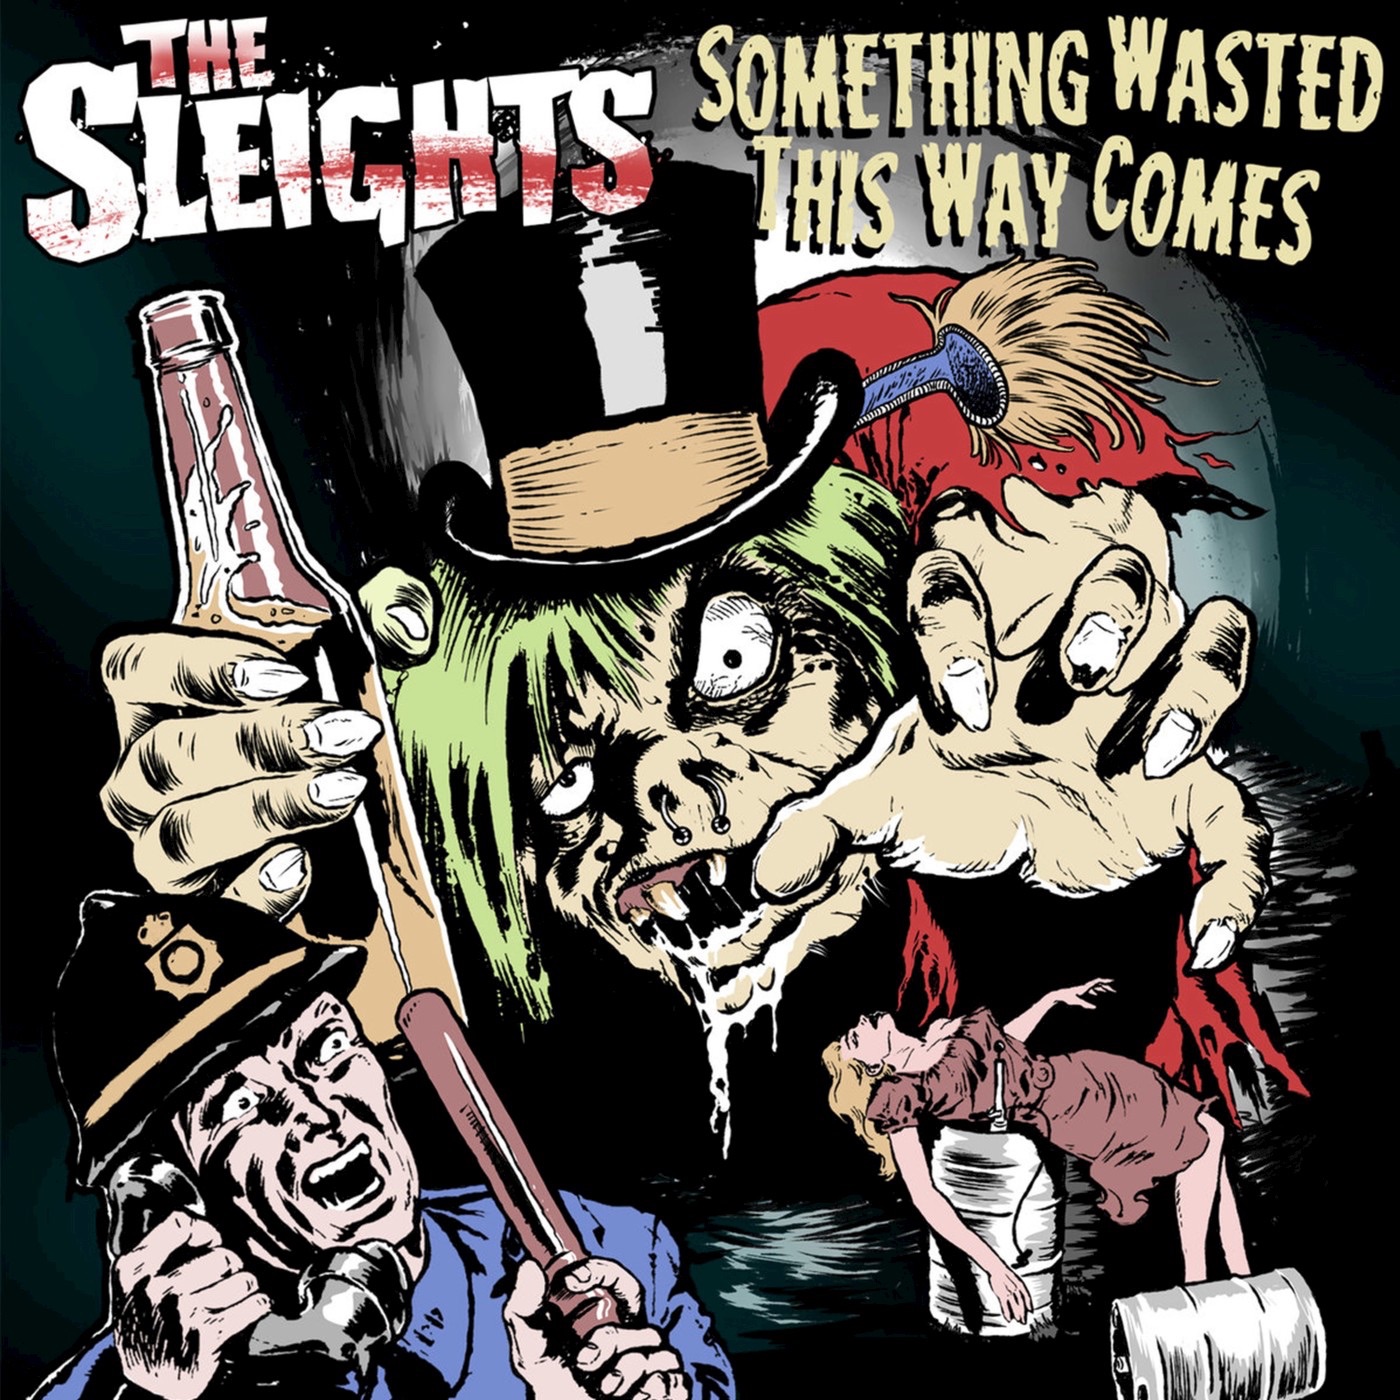 The Sleights - Something Wasted This Way Comes (2019)